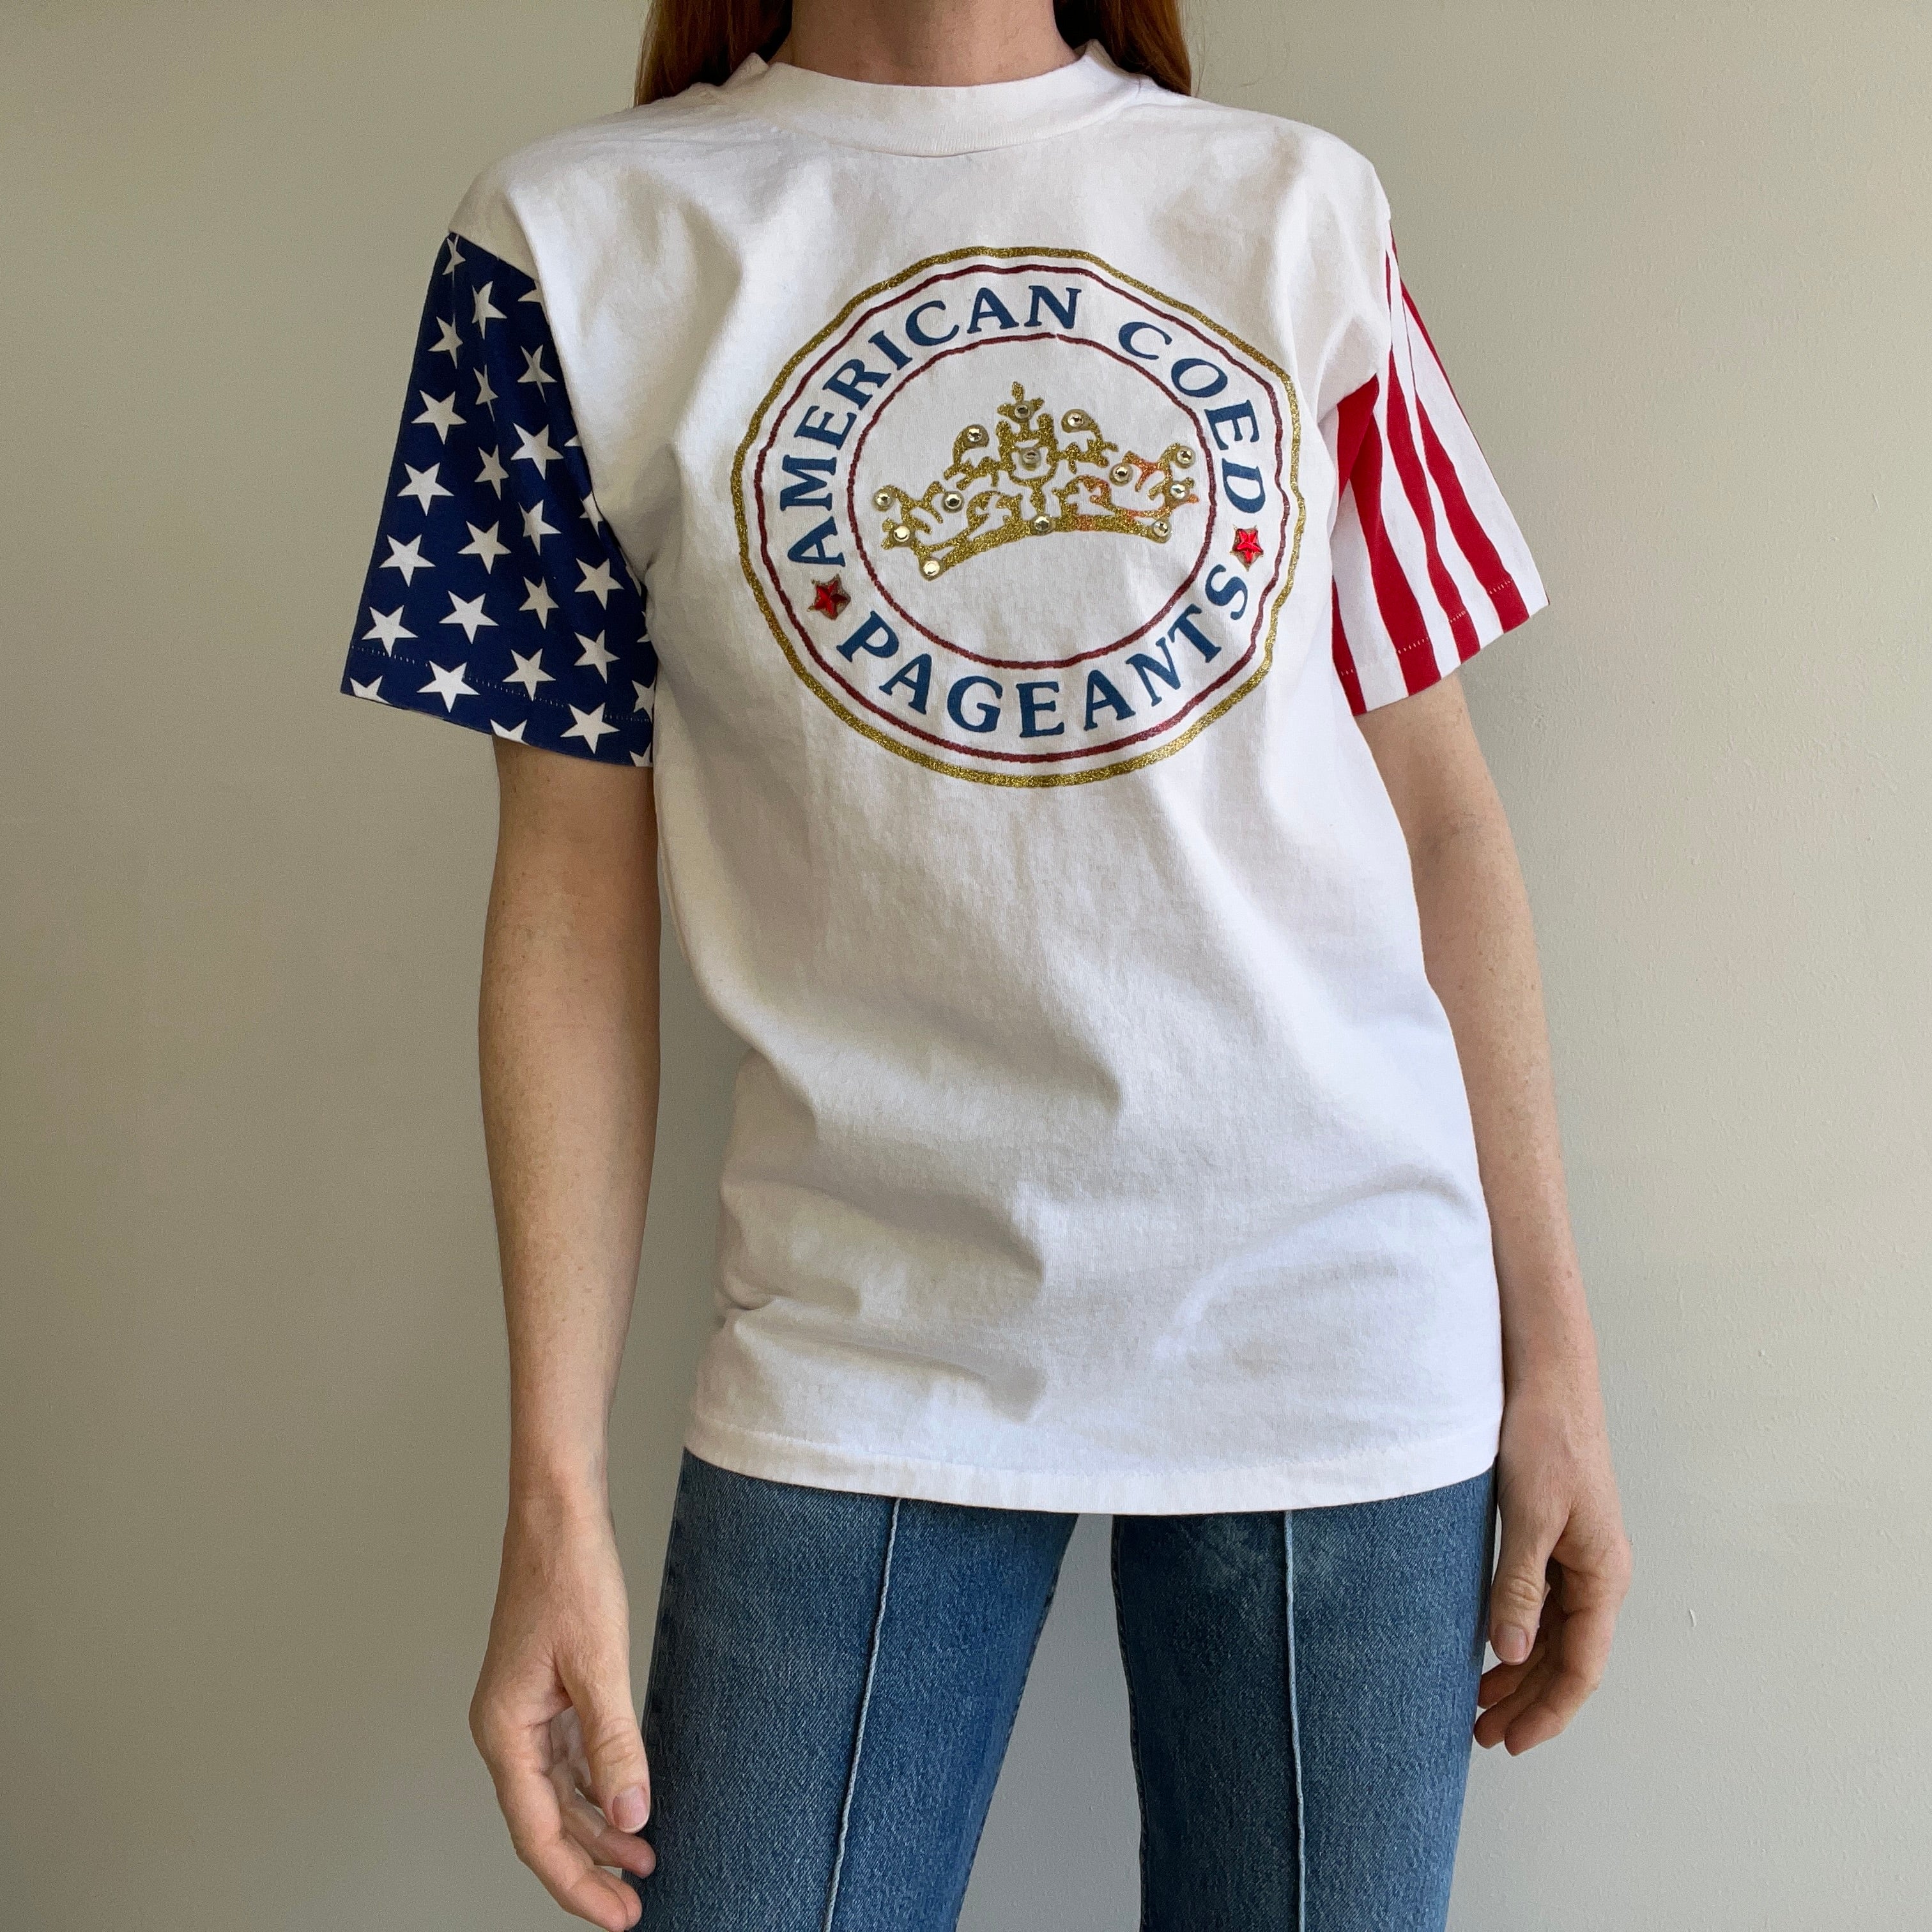 1980/90s American Co-Ed Pageants Bedazzled Cotton T-Shirt